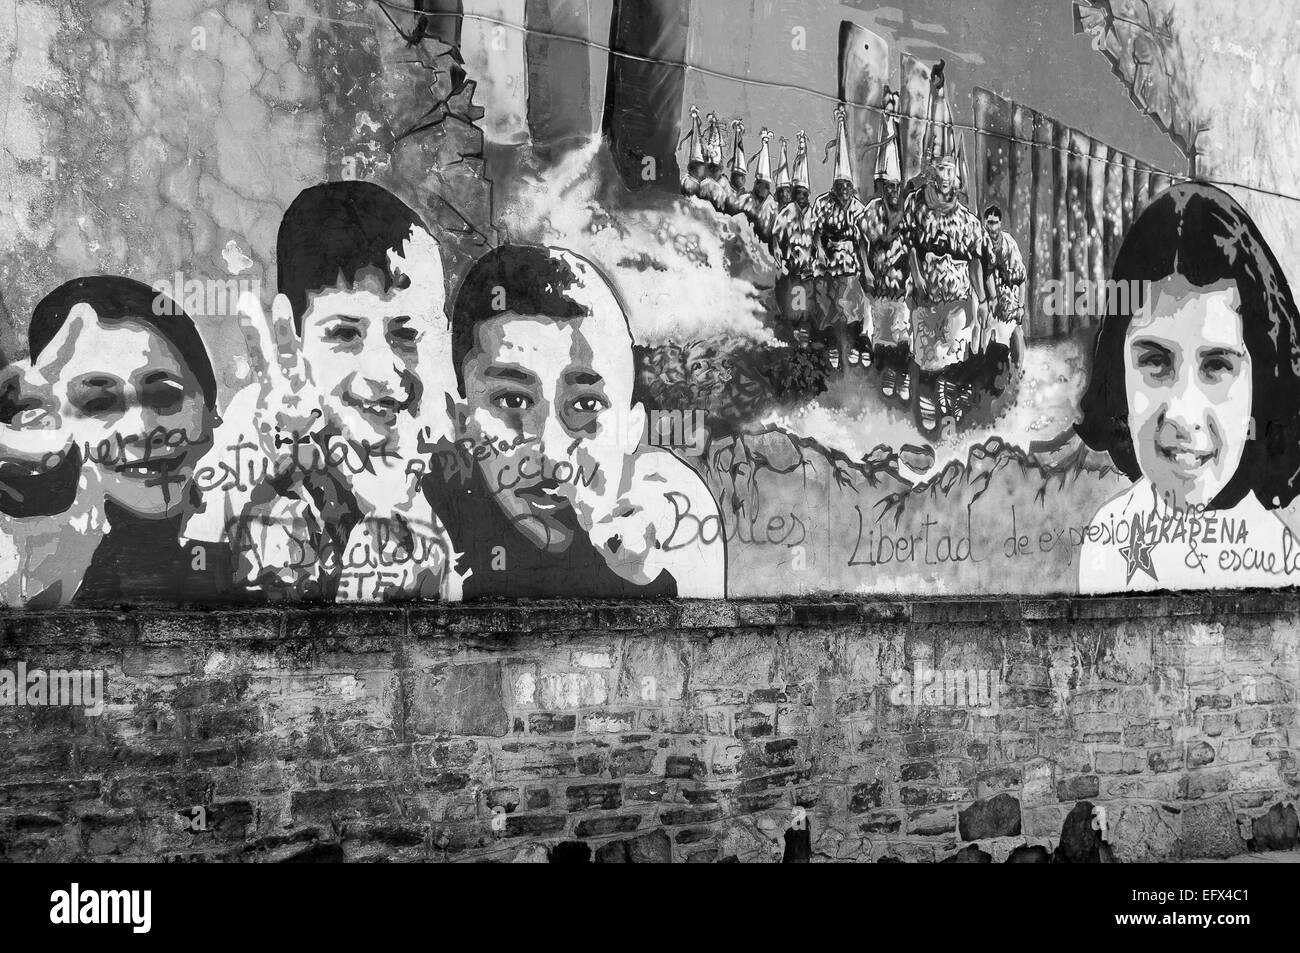 Wall painting in black and white in Vitoria-Gasteiz, Alava, Basque Country, Spain Stock Photo